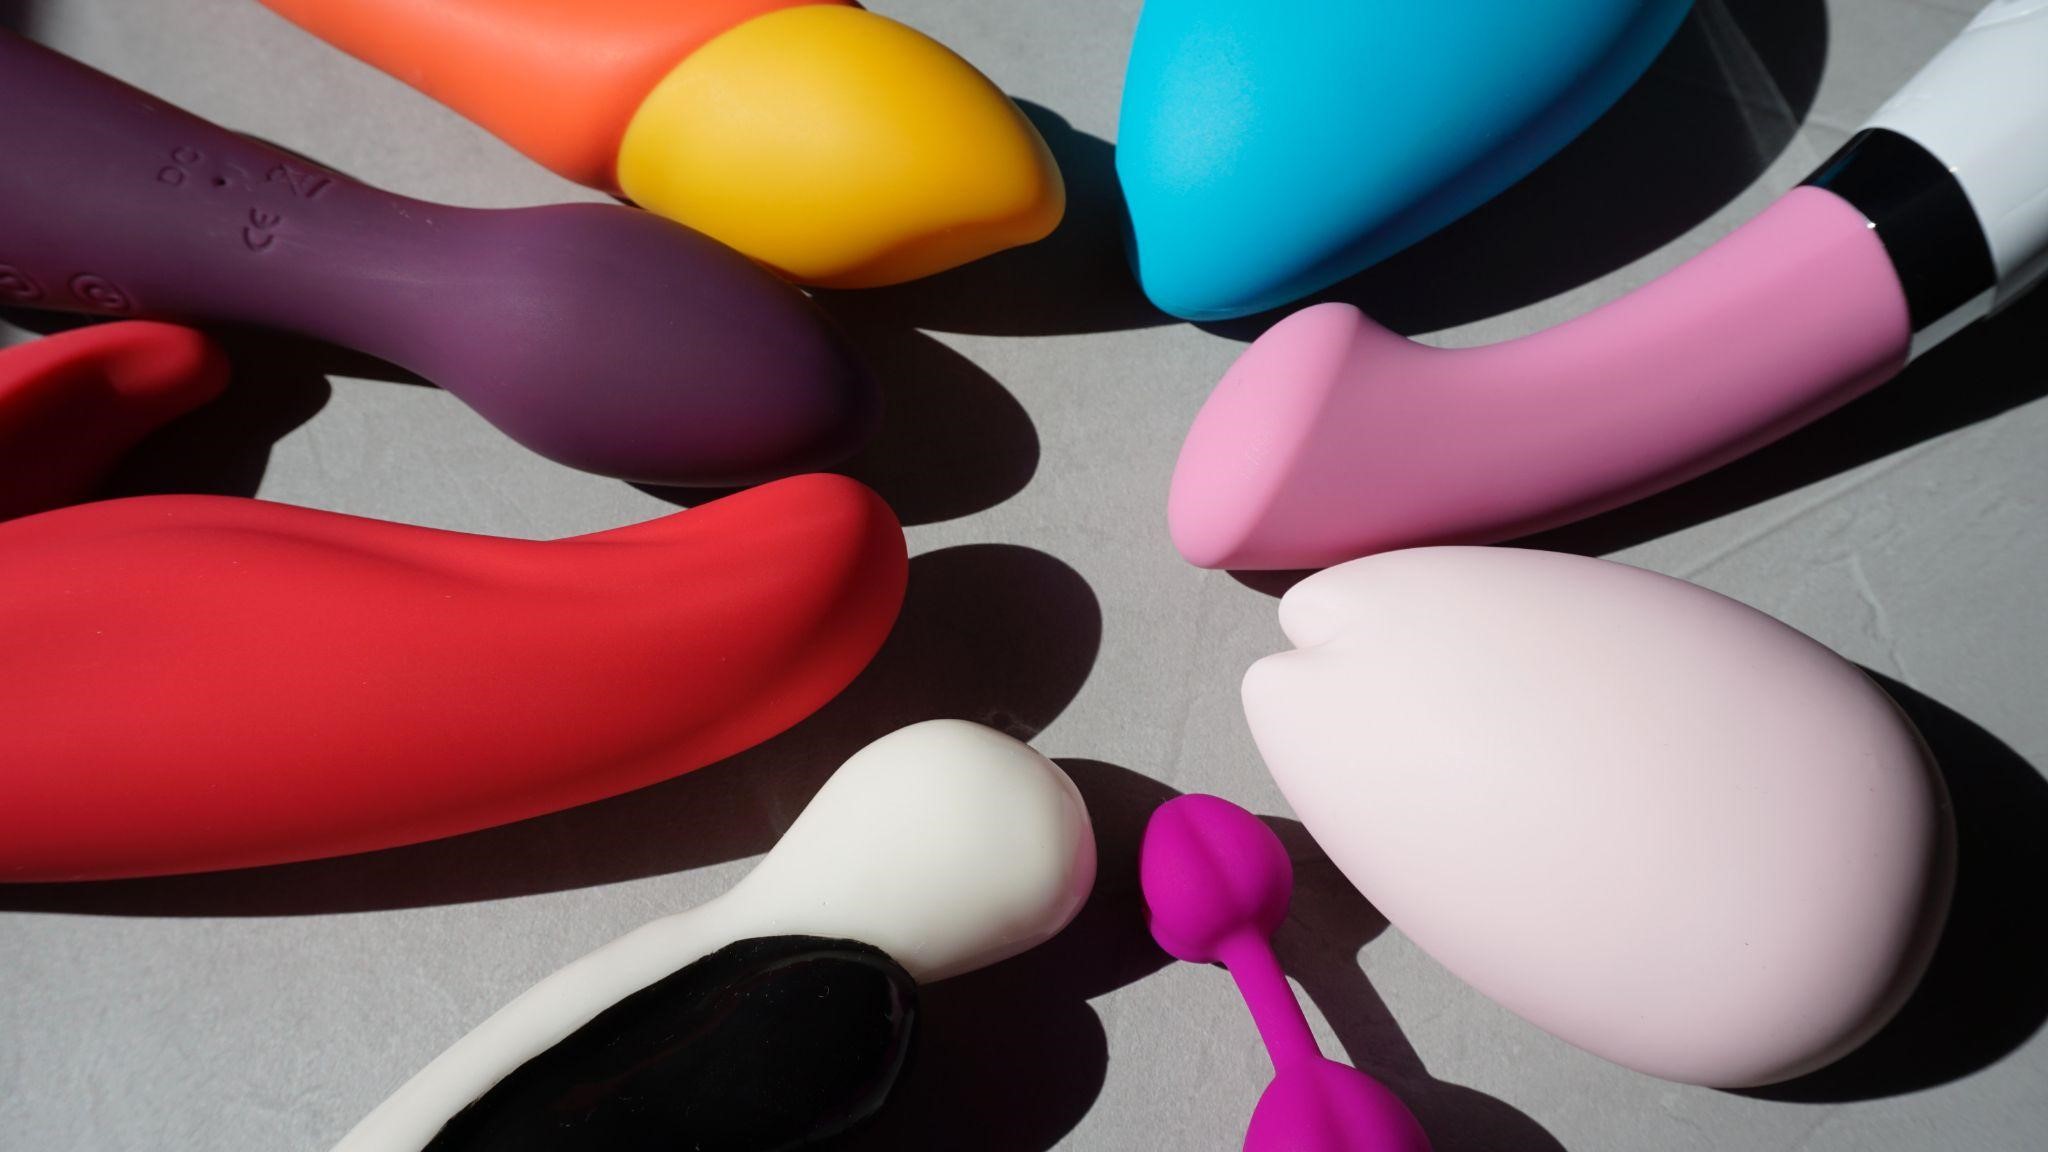 : A circle full of colourful silicone dildos